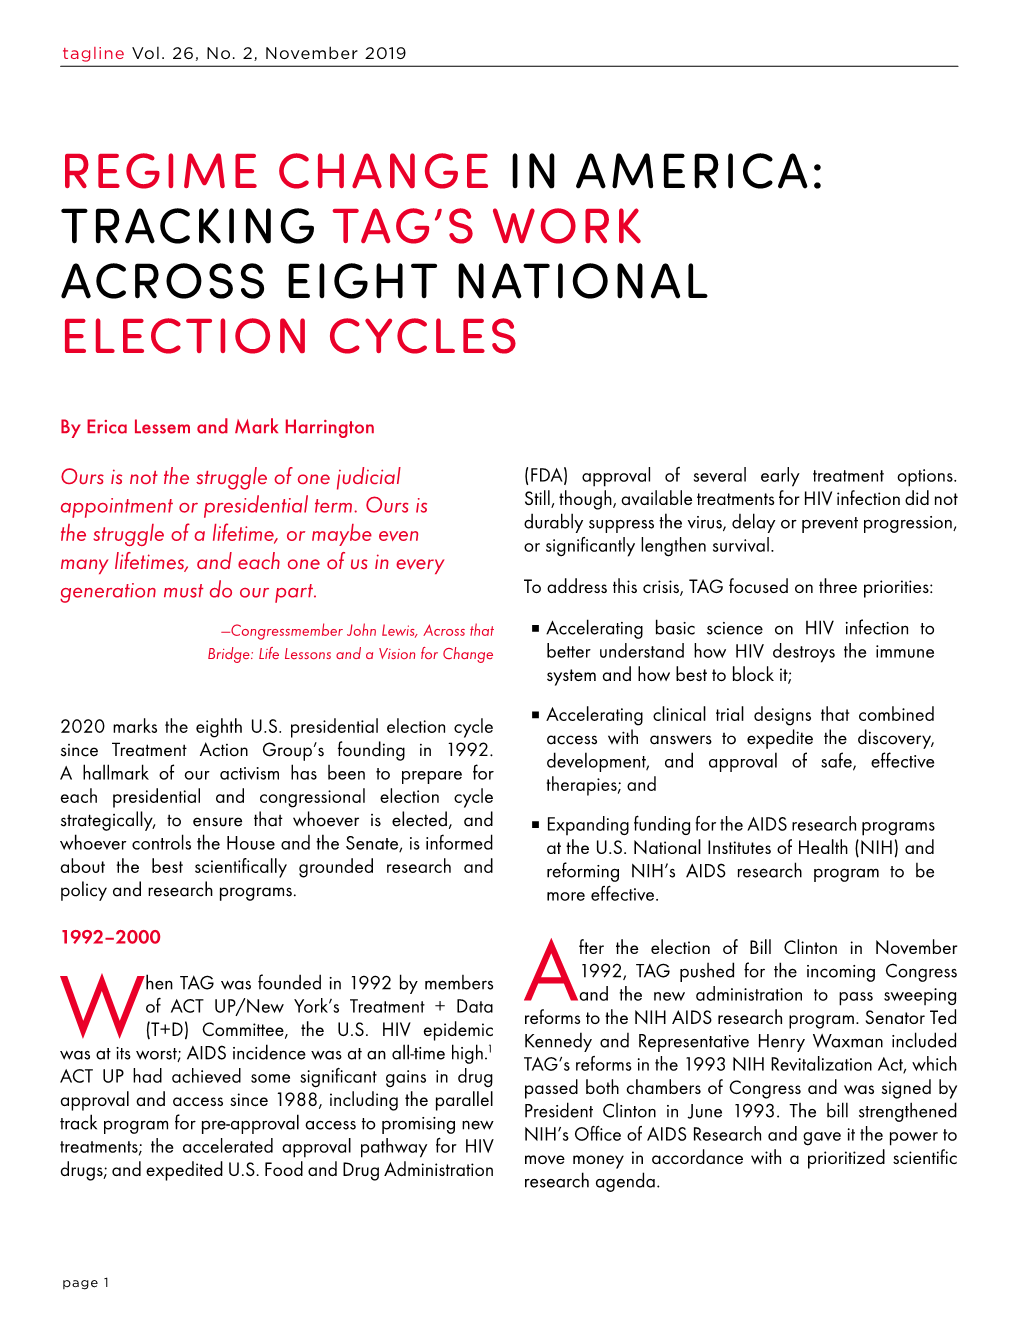 Regime Change in America: Tracking Tag’S Work Across Eight National Election Cycles